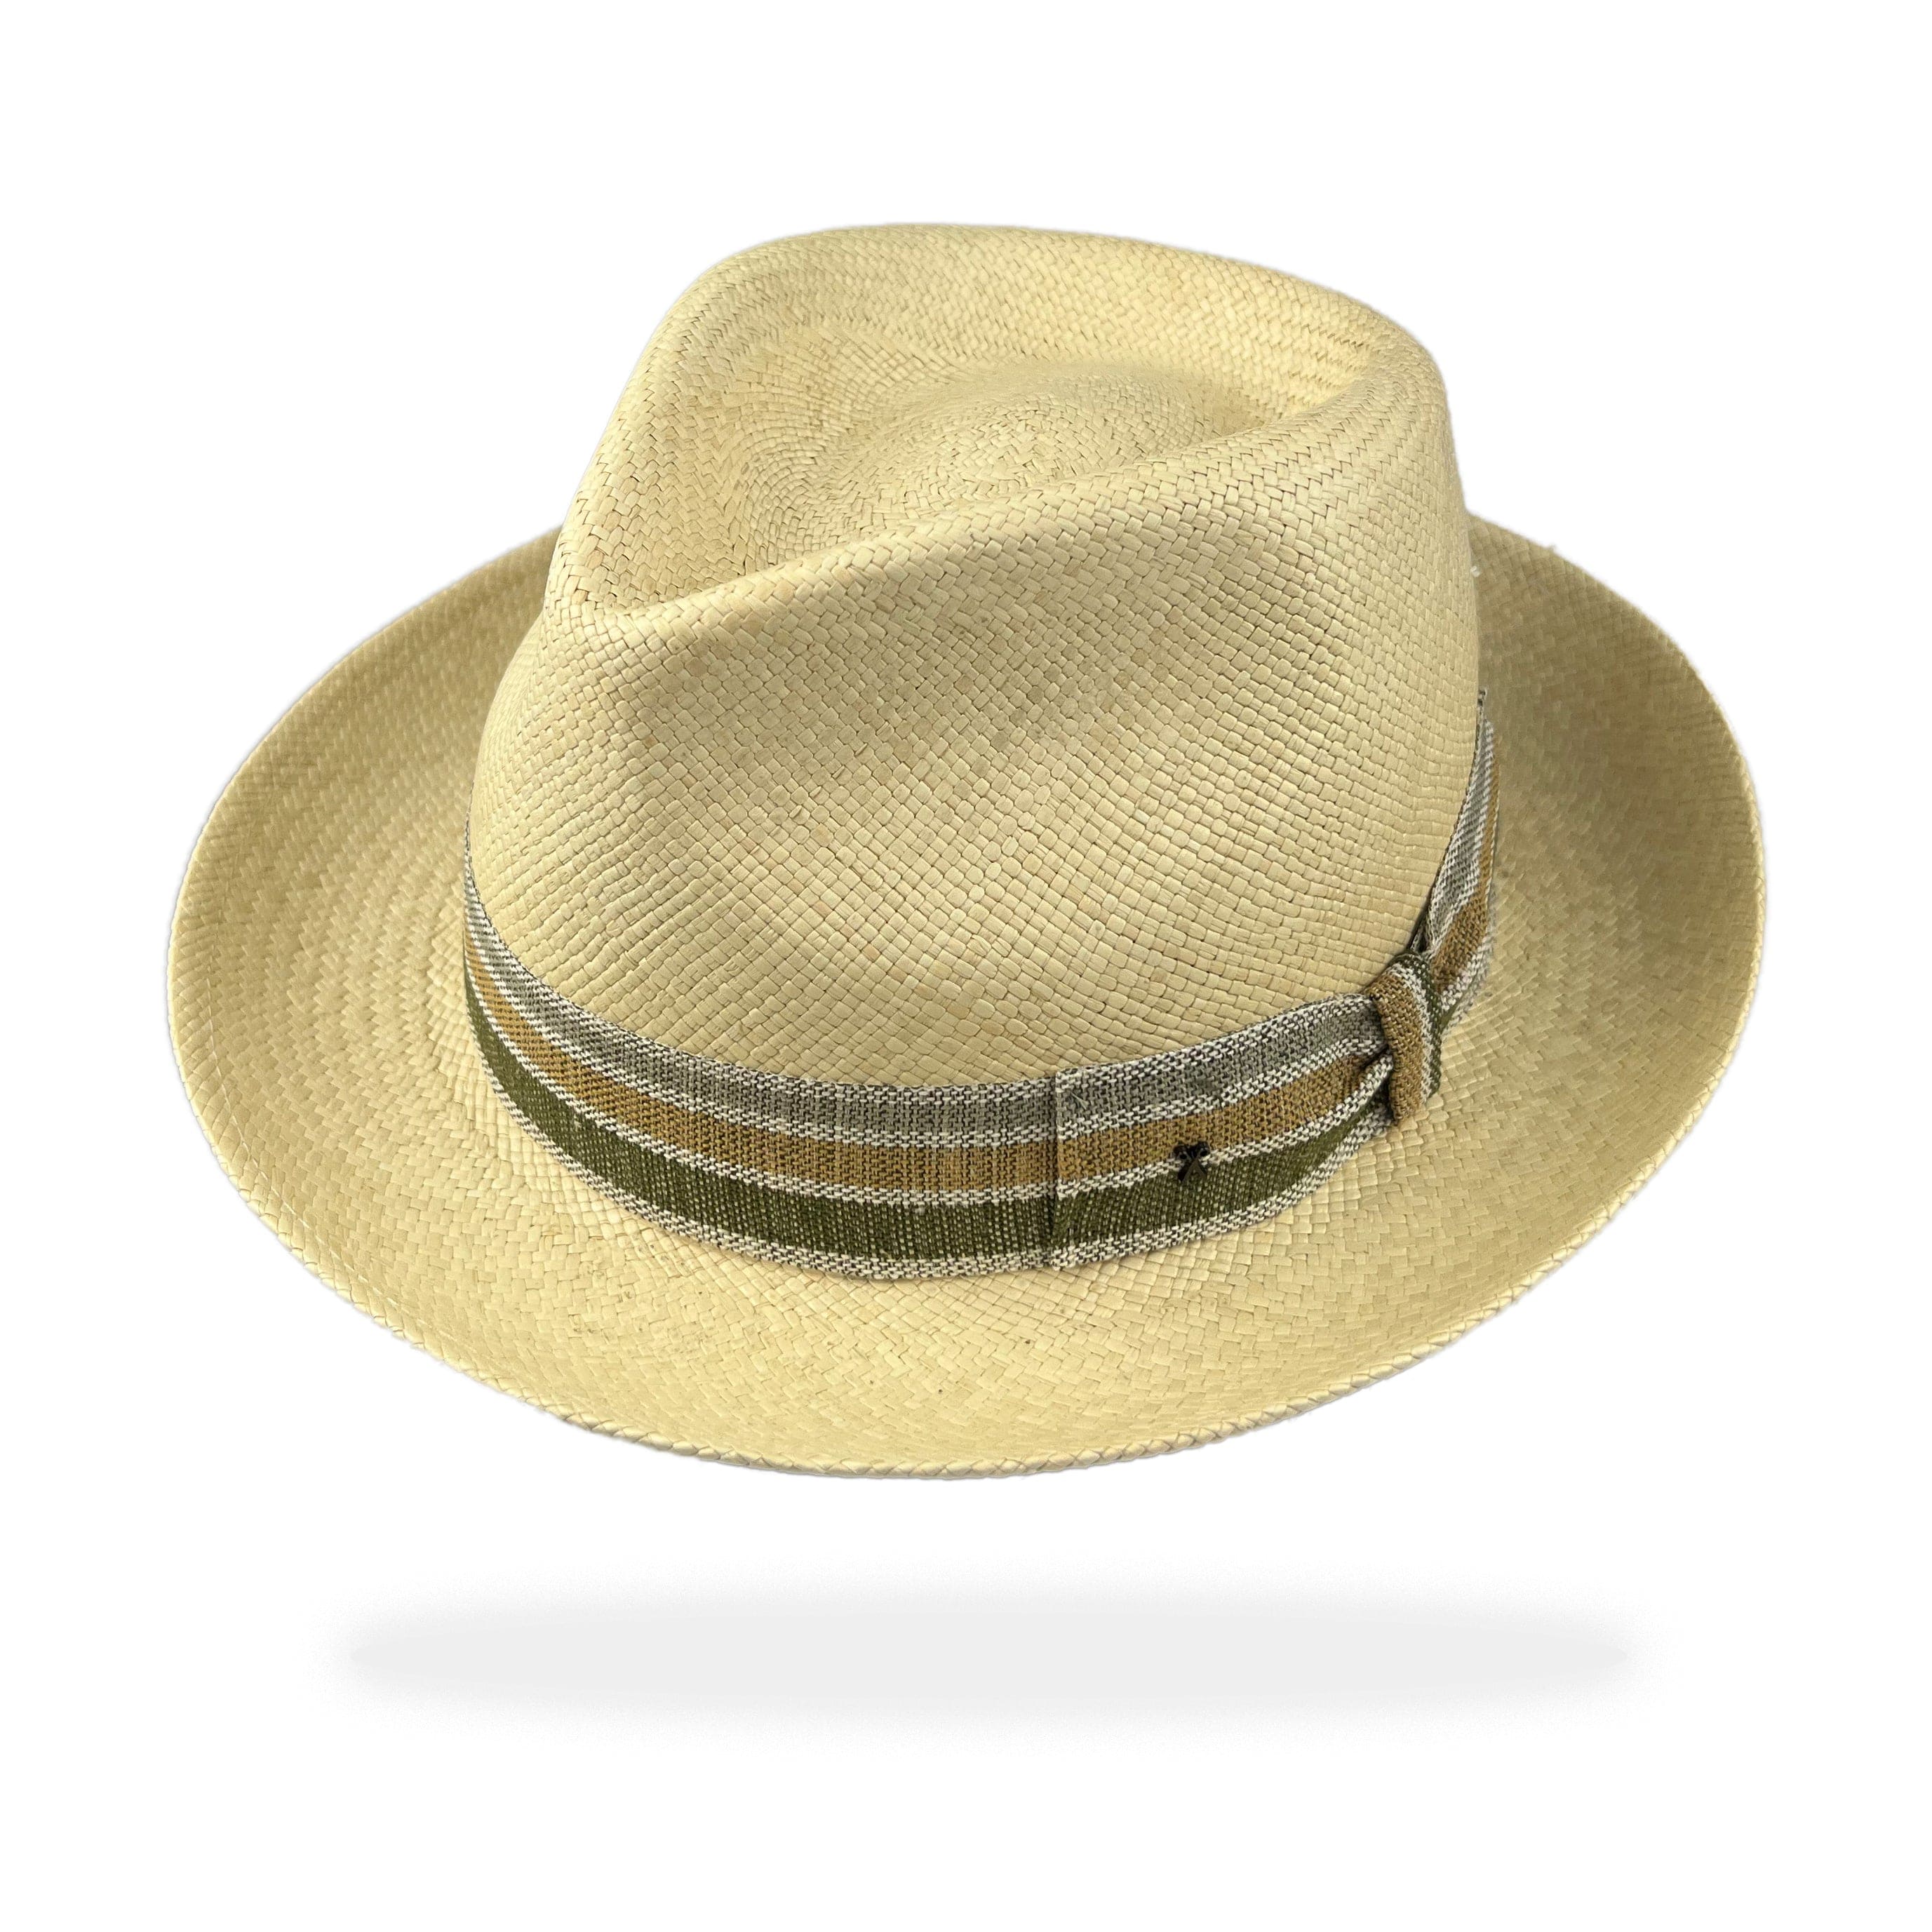 Unisex | Trilby Panama Hat | Natural Toquilla | Grey Olive Beige Band | Made in Italy